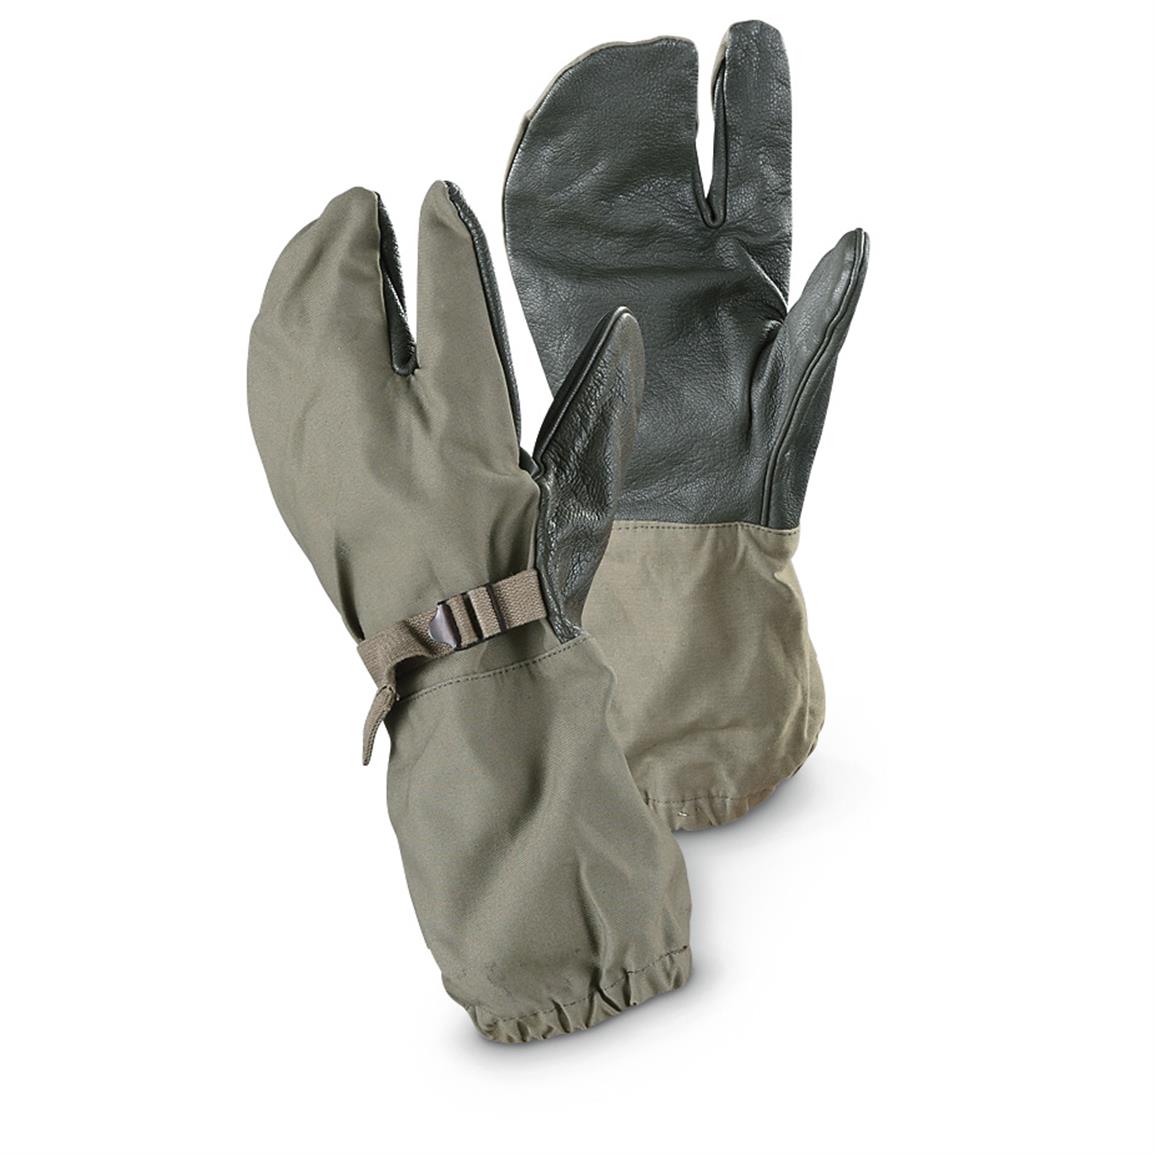 GERMAN EURO MILITARY ARMY TRIGGER FINGER MITTENS TACTICAL SHOOTING GLOVES MENS M 